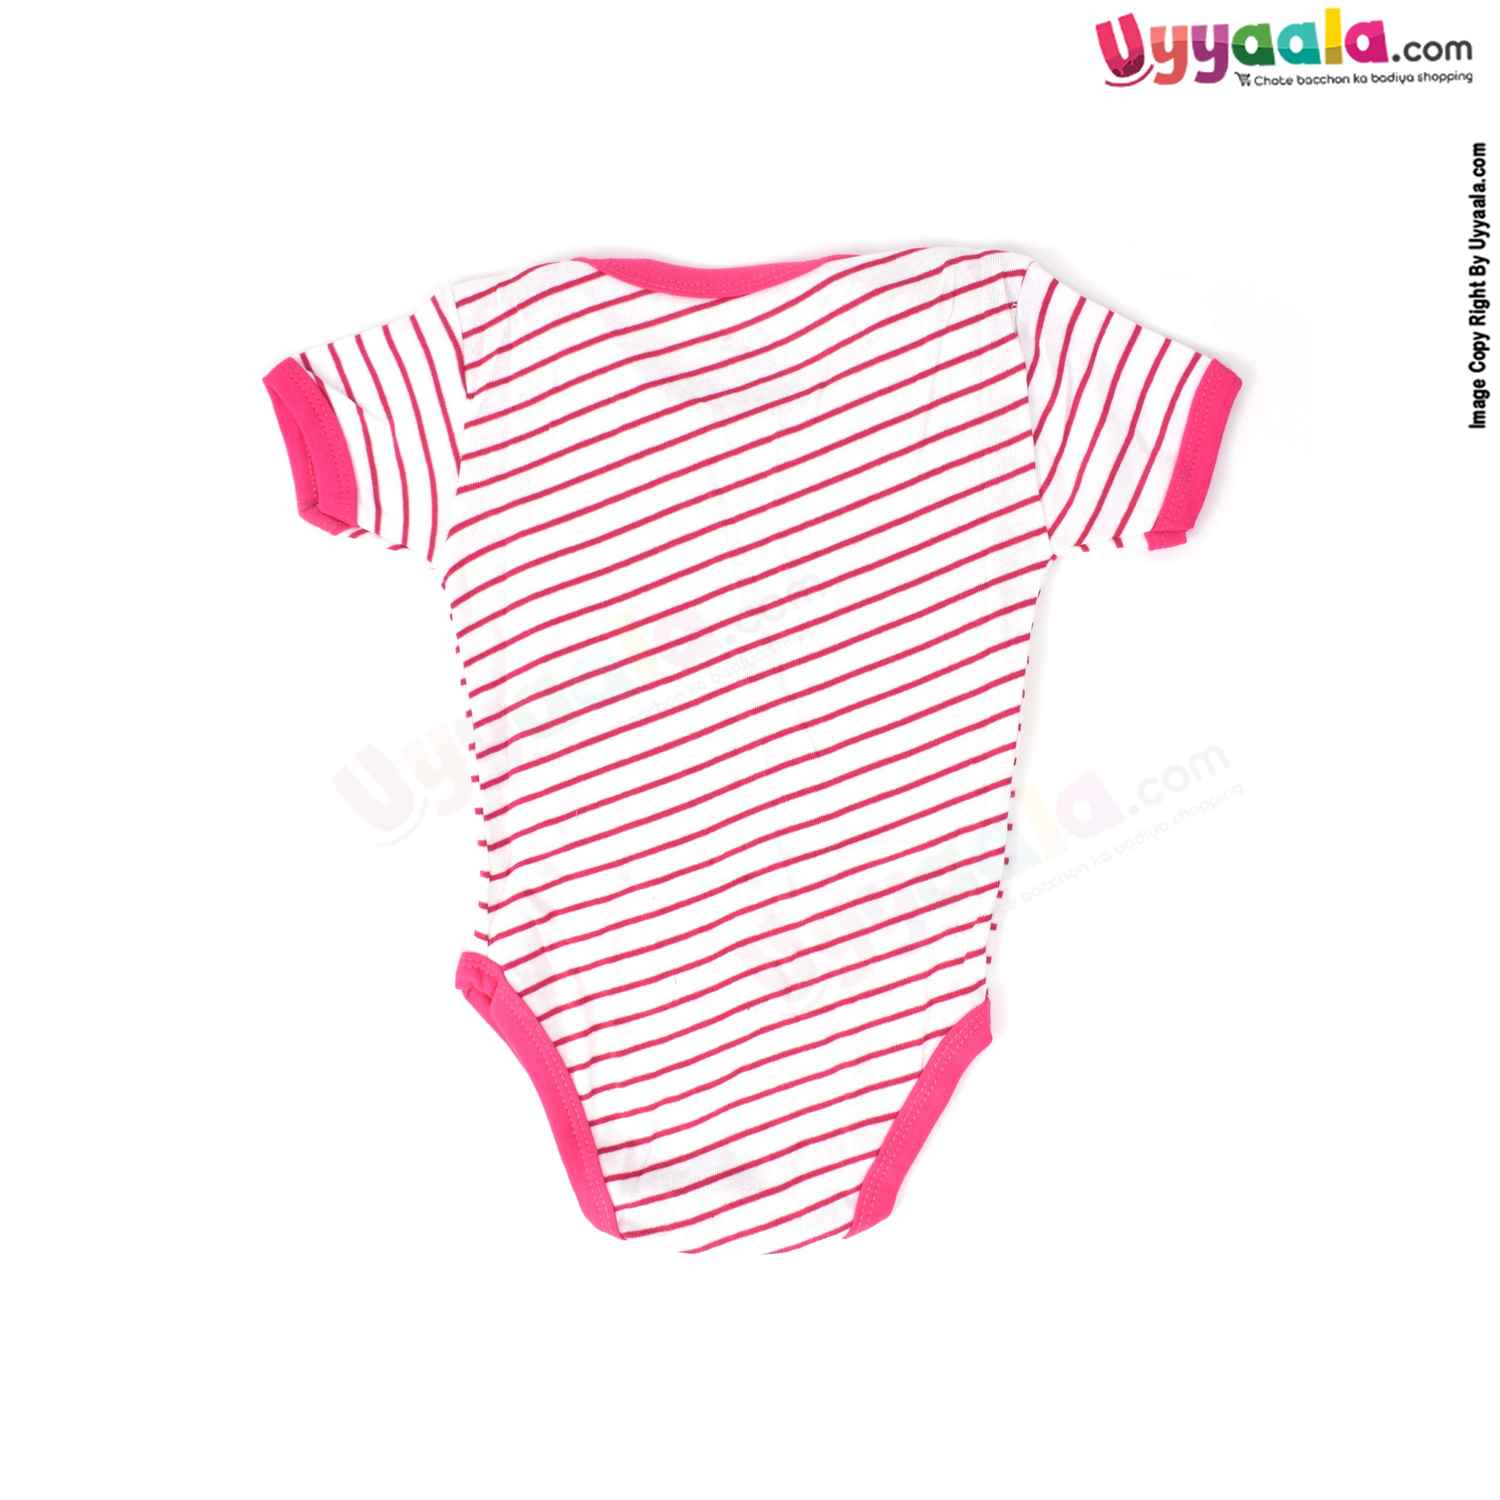 Precious One Short Sleeve Body Suit 100% Soft Hosiery Cotton - Pink & White Stripes (6-9M)